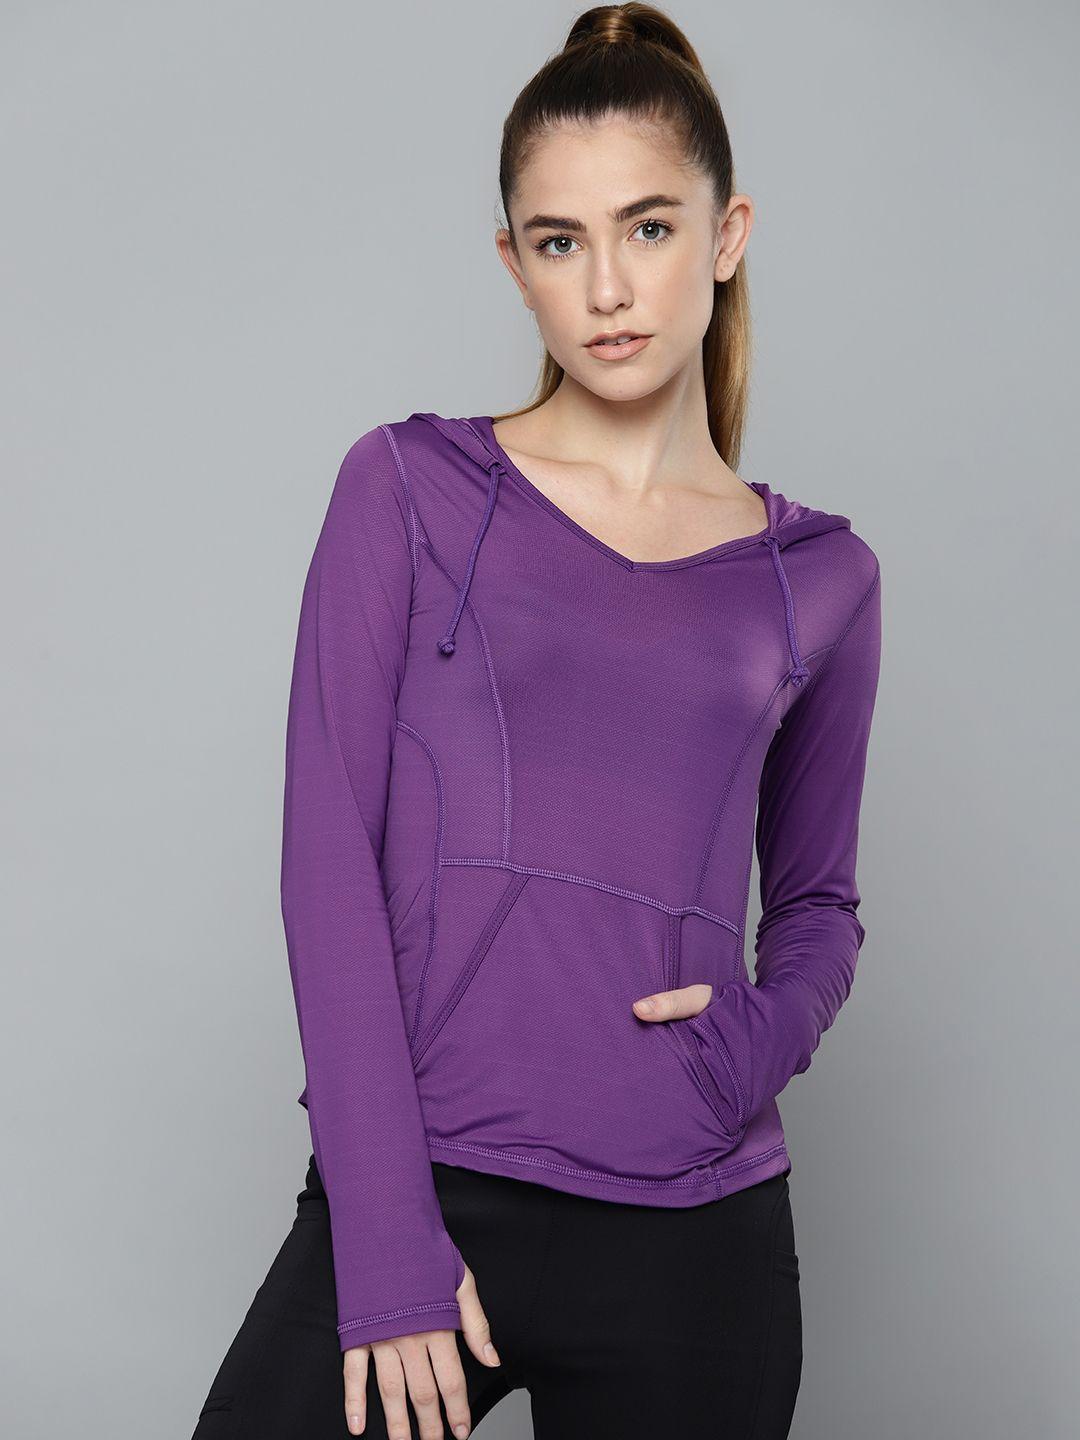 fitkin women purple hooded training or gym t-shirt